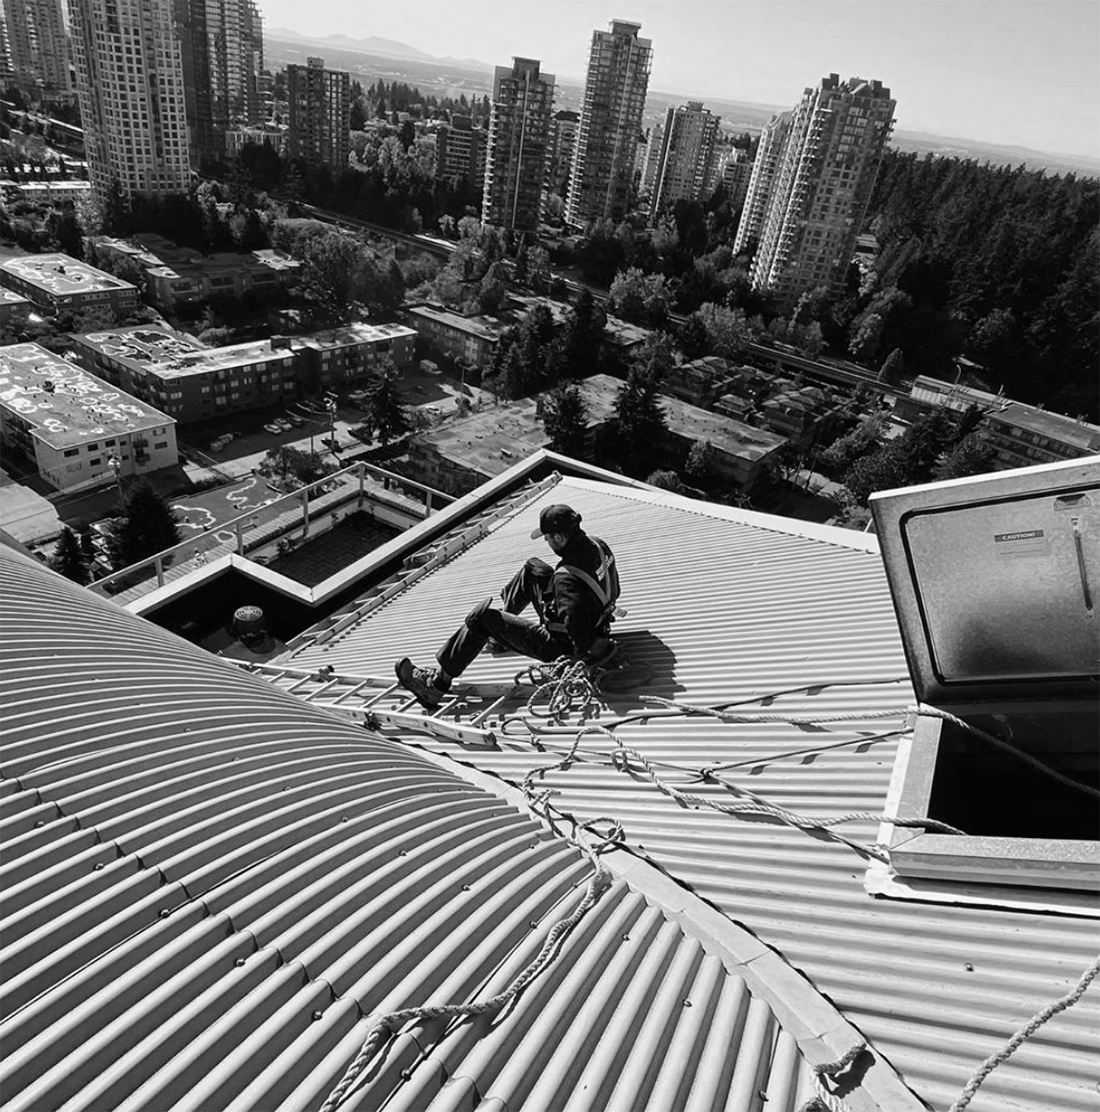 Roofer on top of a building.